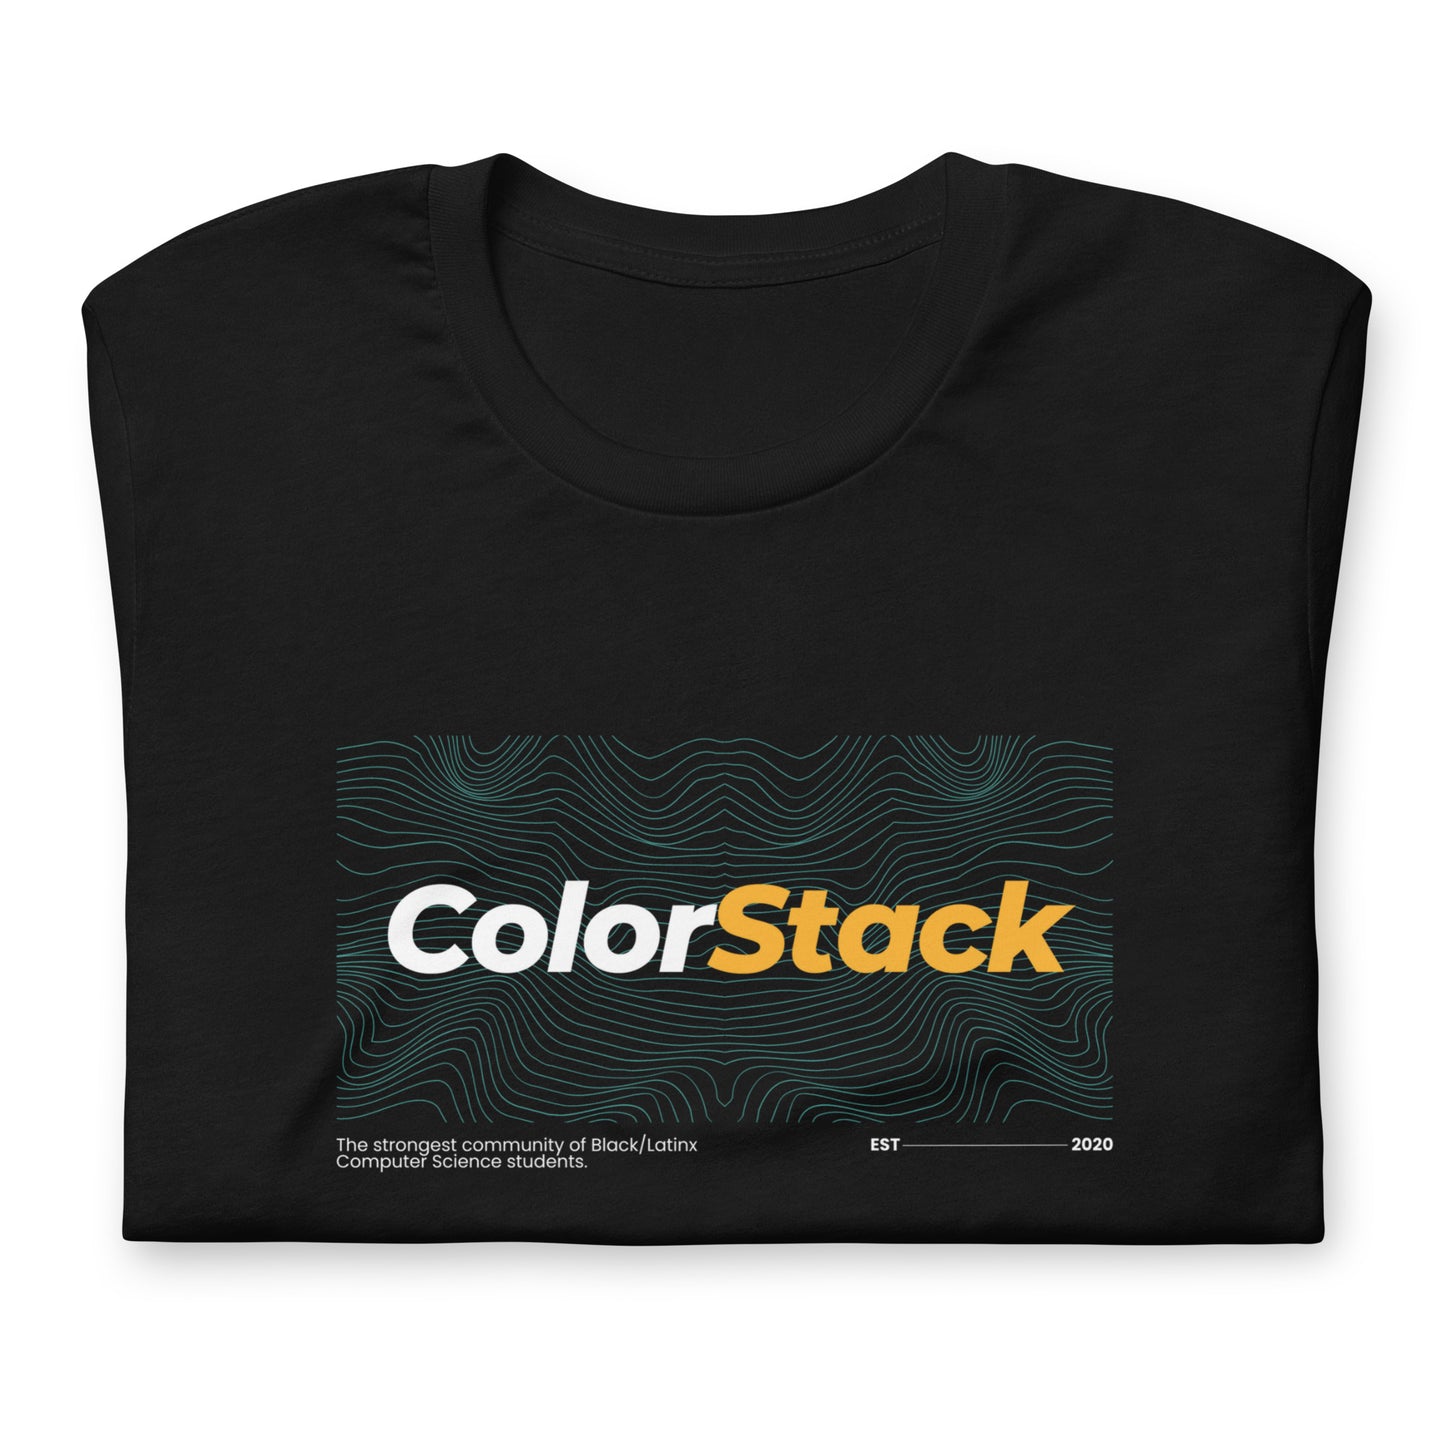 Rep ColorStack Tee